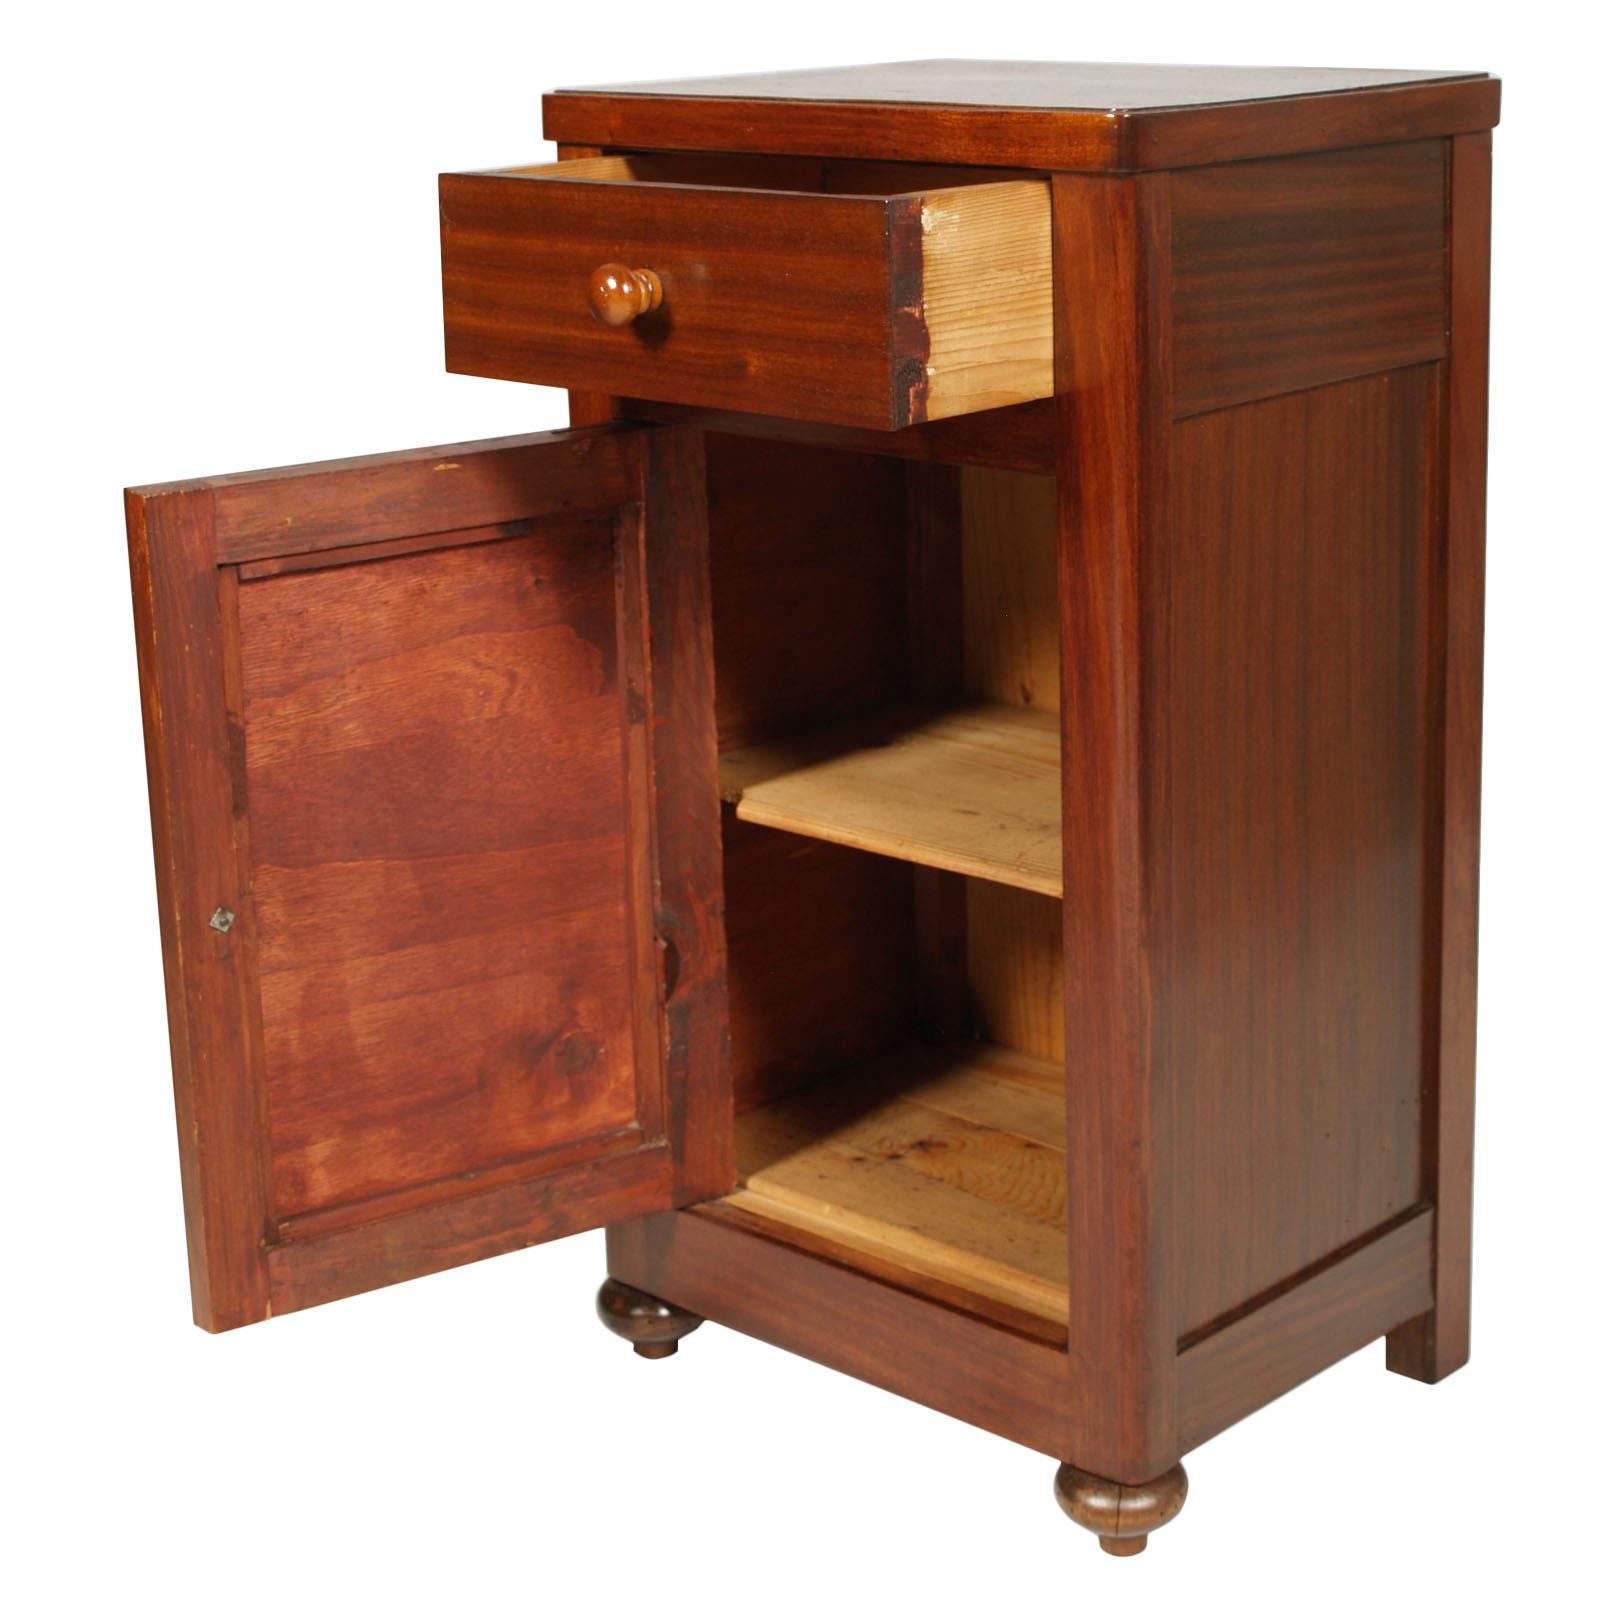 Italian 1900s Rustic Country Nightstand, Bedside Table, Walnut and Mahogany, Restored For Sale